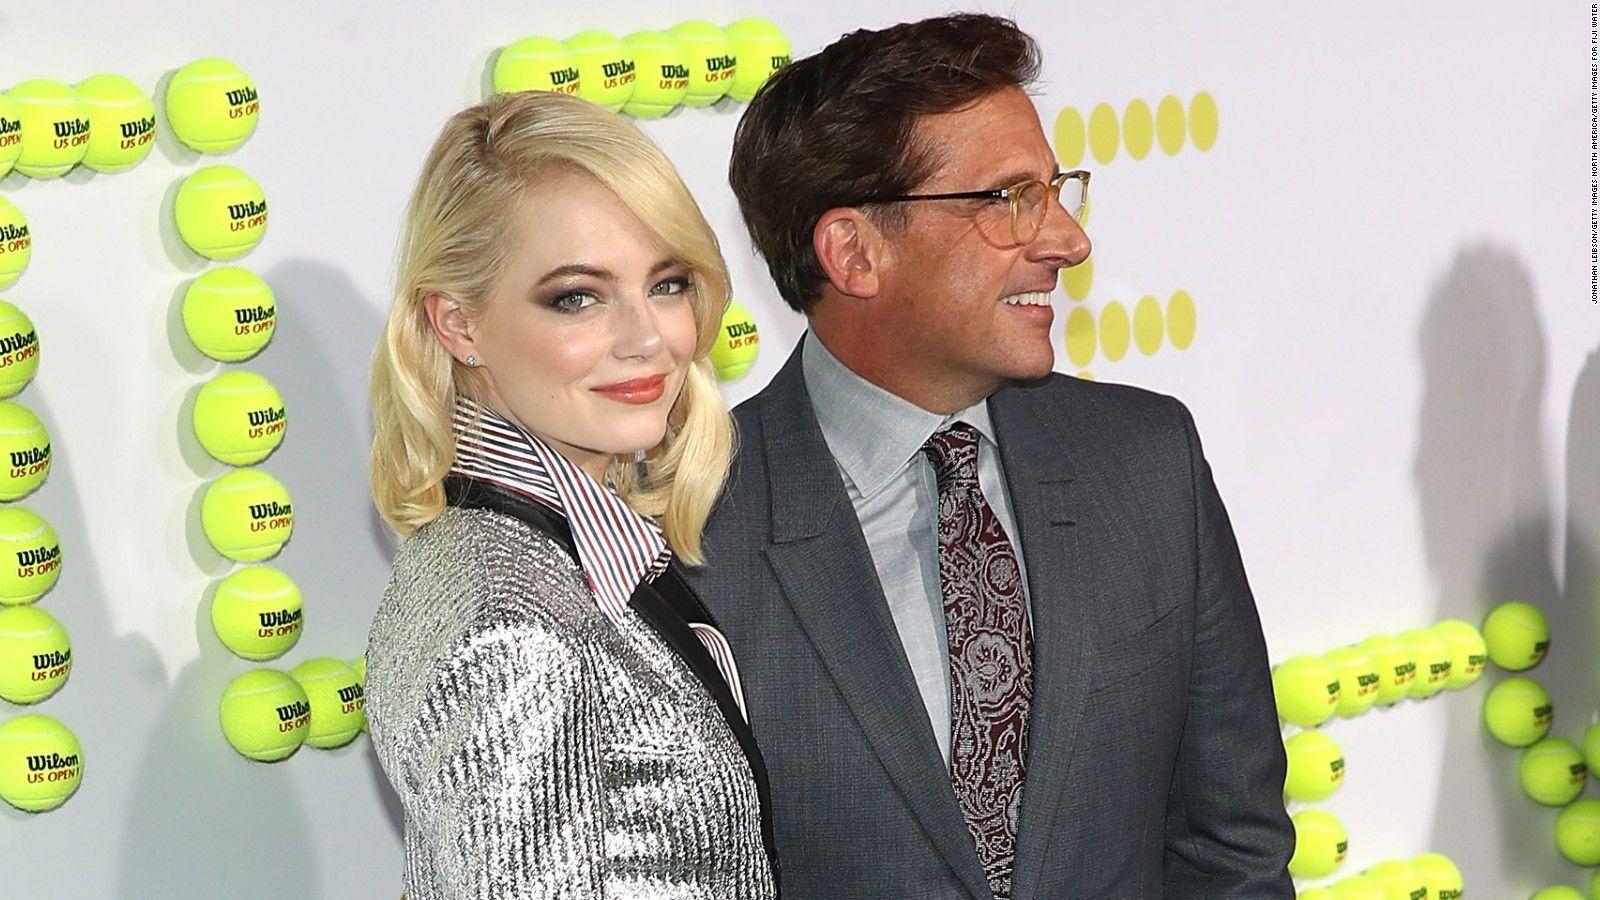 Battle of the Sexes' review: Emma Stone, Steve Carell